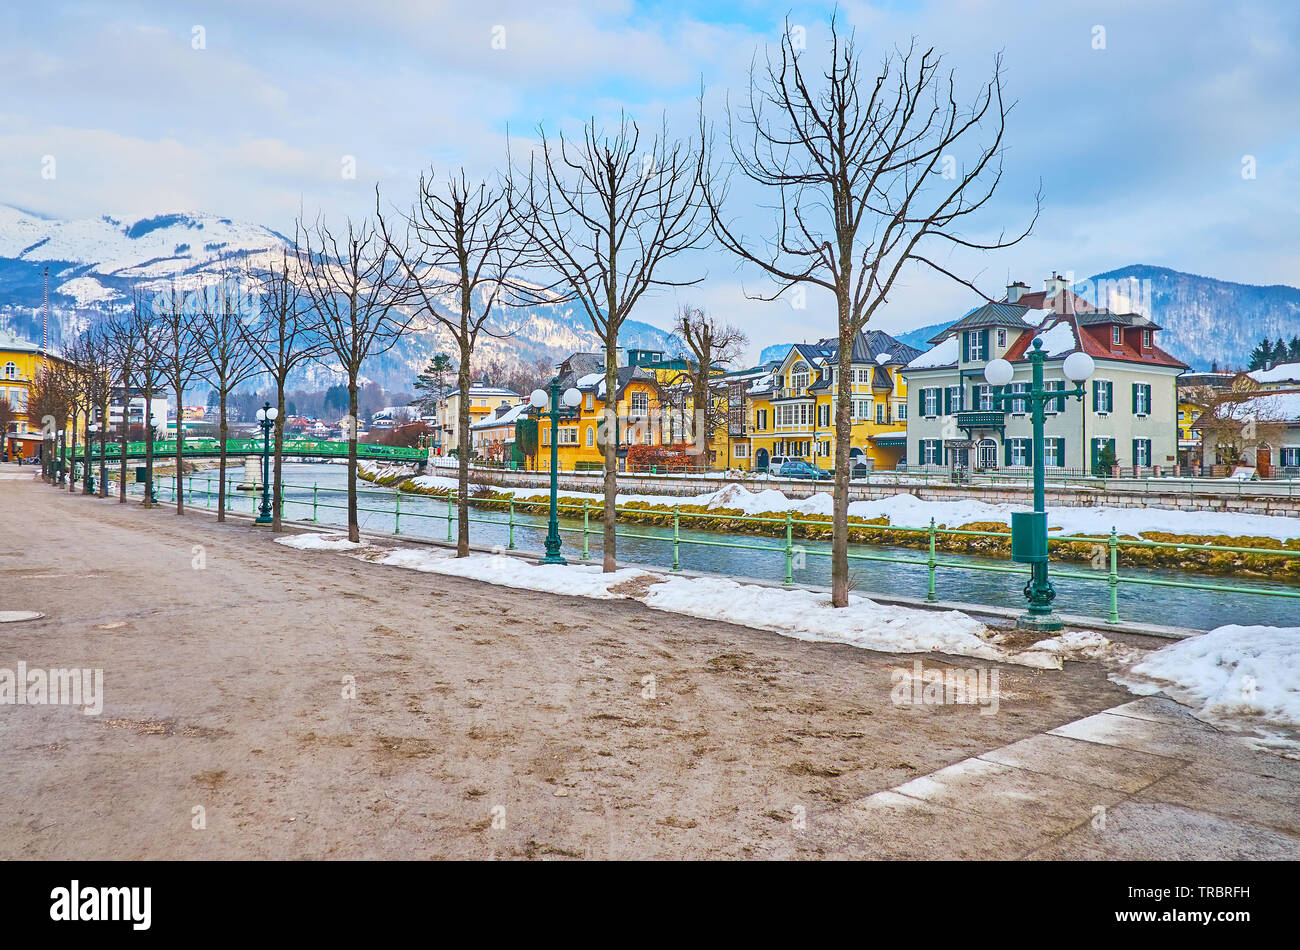 The winter Esplanade embankment of Traun river with a line of young trees, retro streetlights and nice views, Bad Ischl, Salzkammergut, Austria Stock Photo